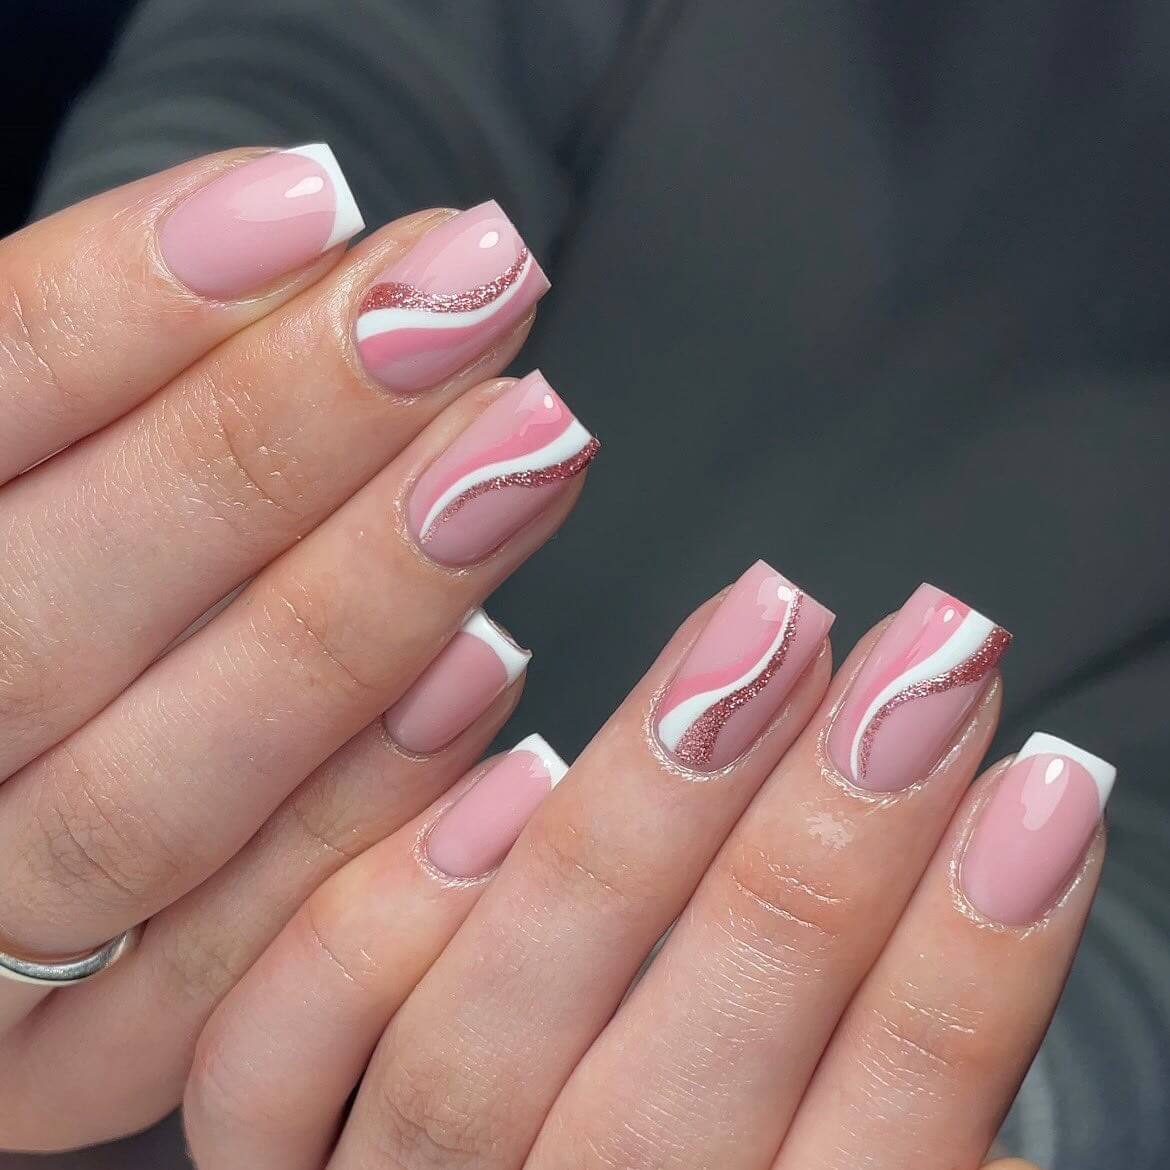 Swirl French Tip Nails